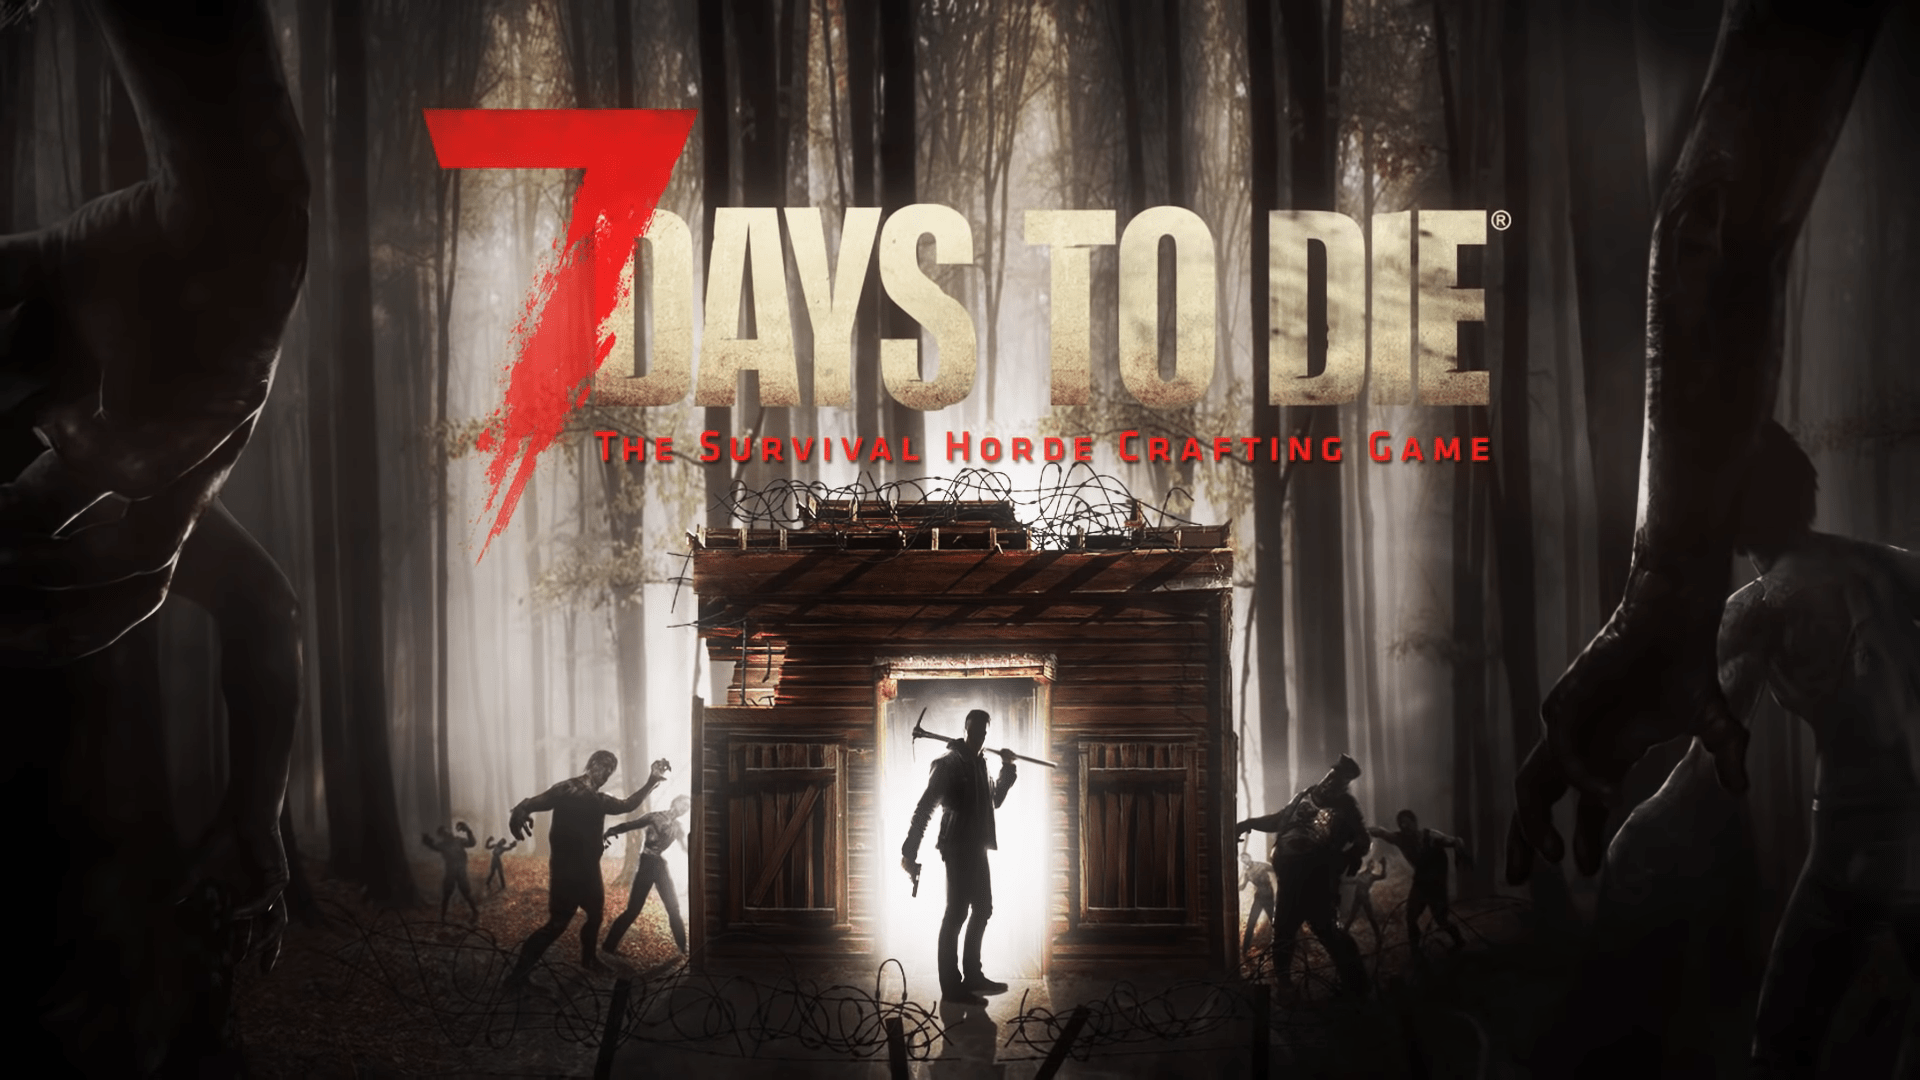 7 Days To Die Gameplay Trailer Available Now 1 14 Screenshot